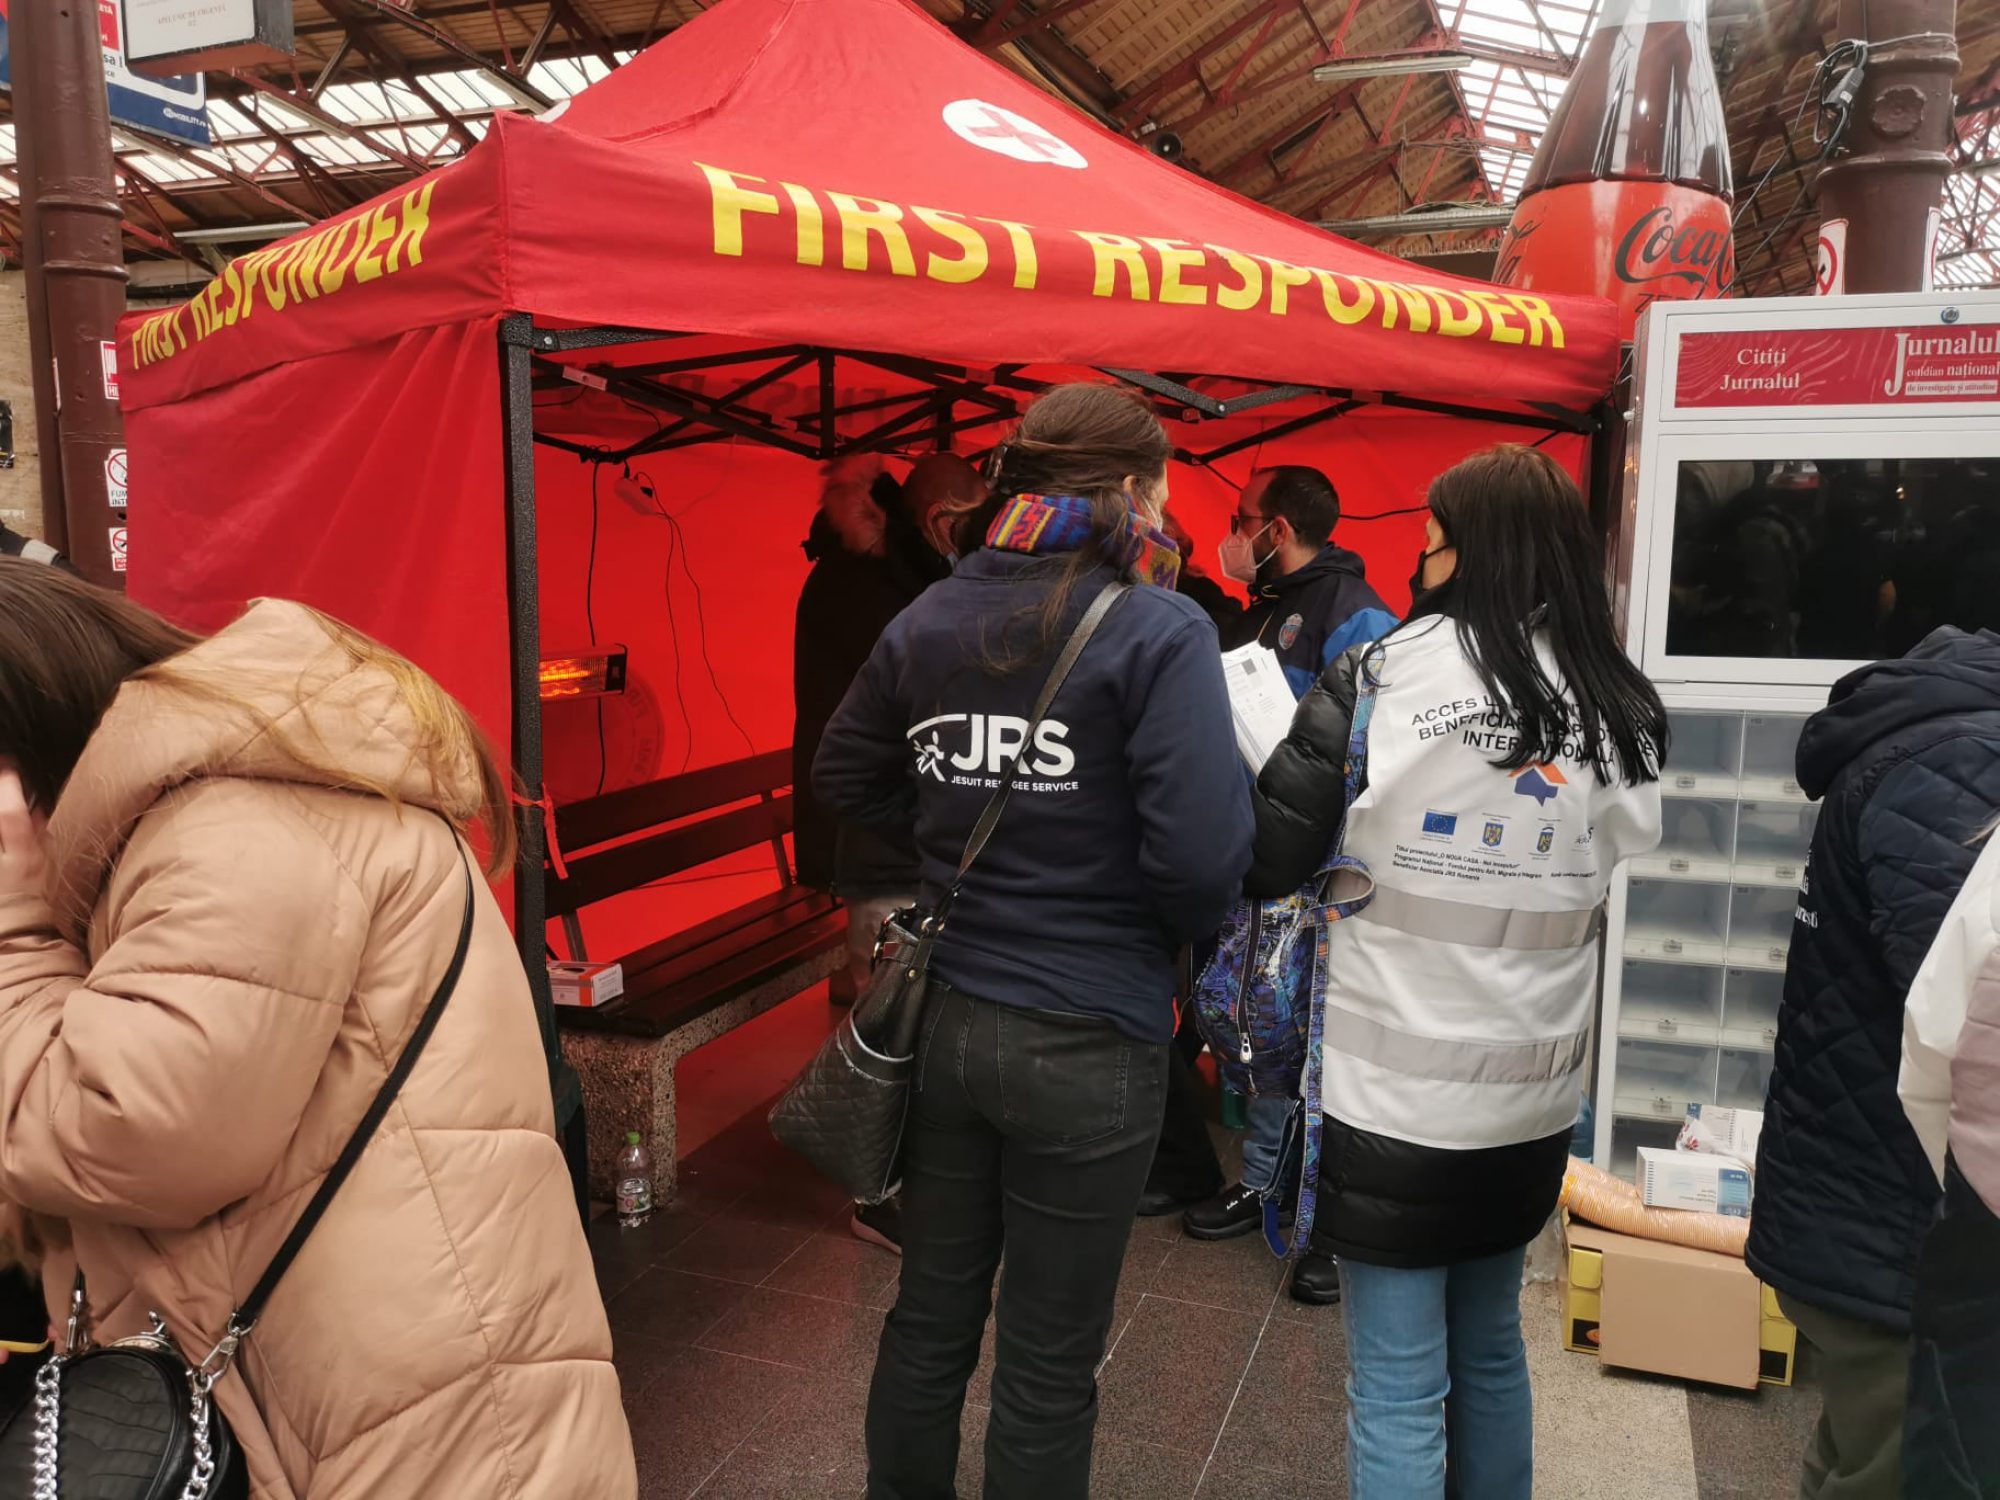 JRS Romania staff is at North Station, assisting Ukrainian refugees arriving by train.